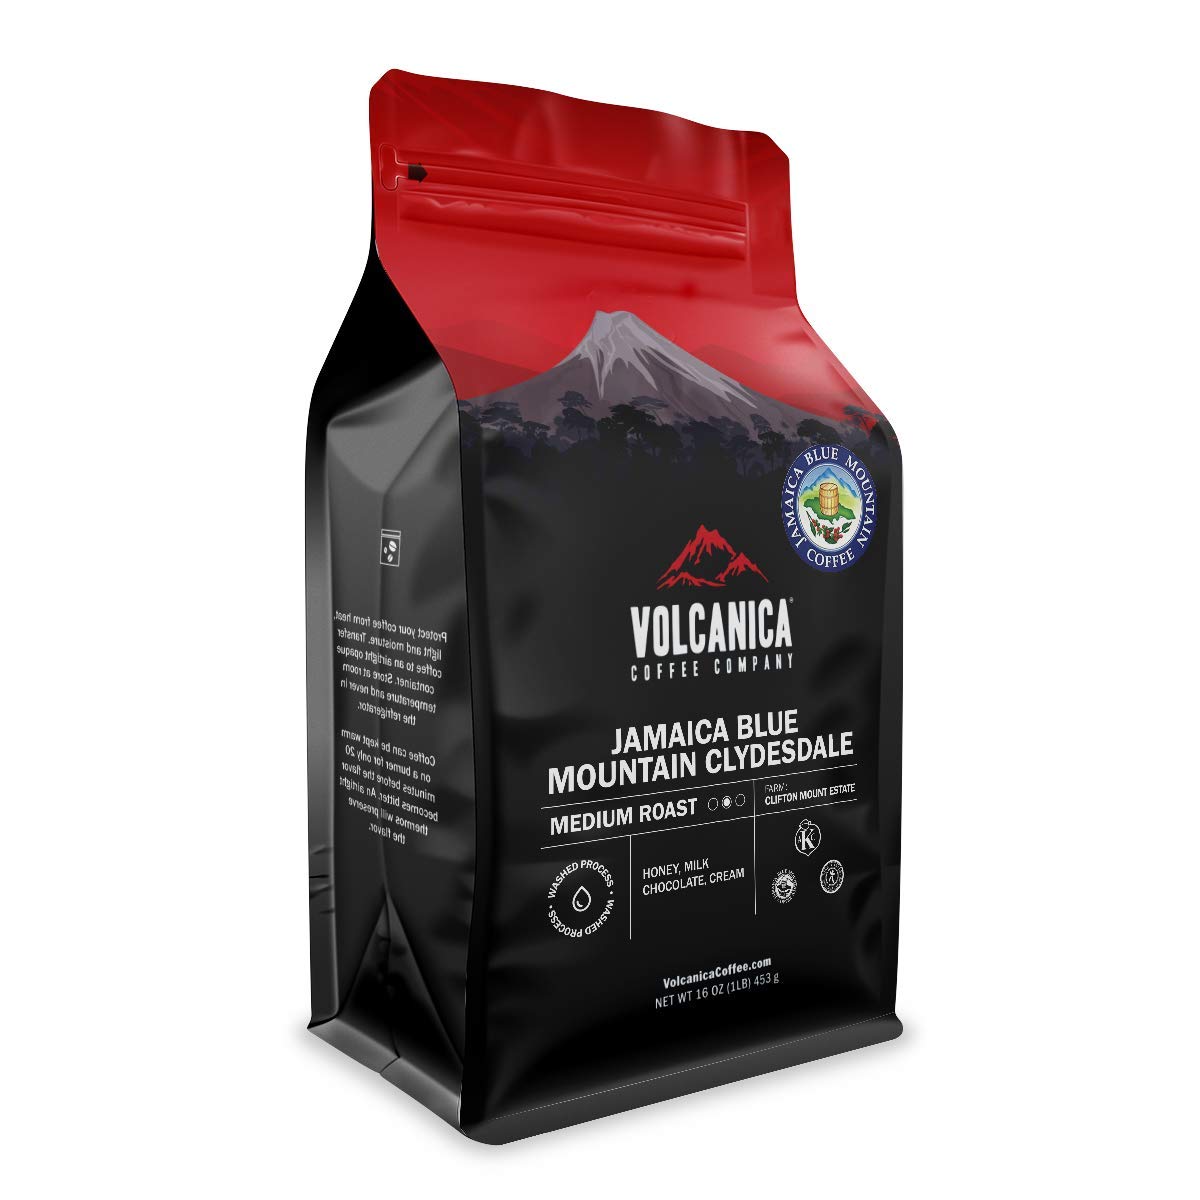 Volcanica Jamaican Blue Mountain Coffee, Clydesdale Estate